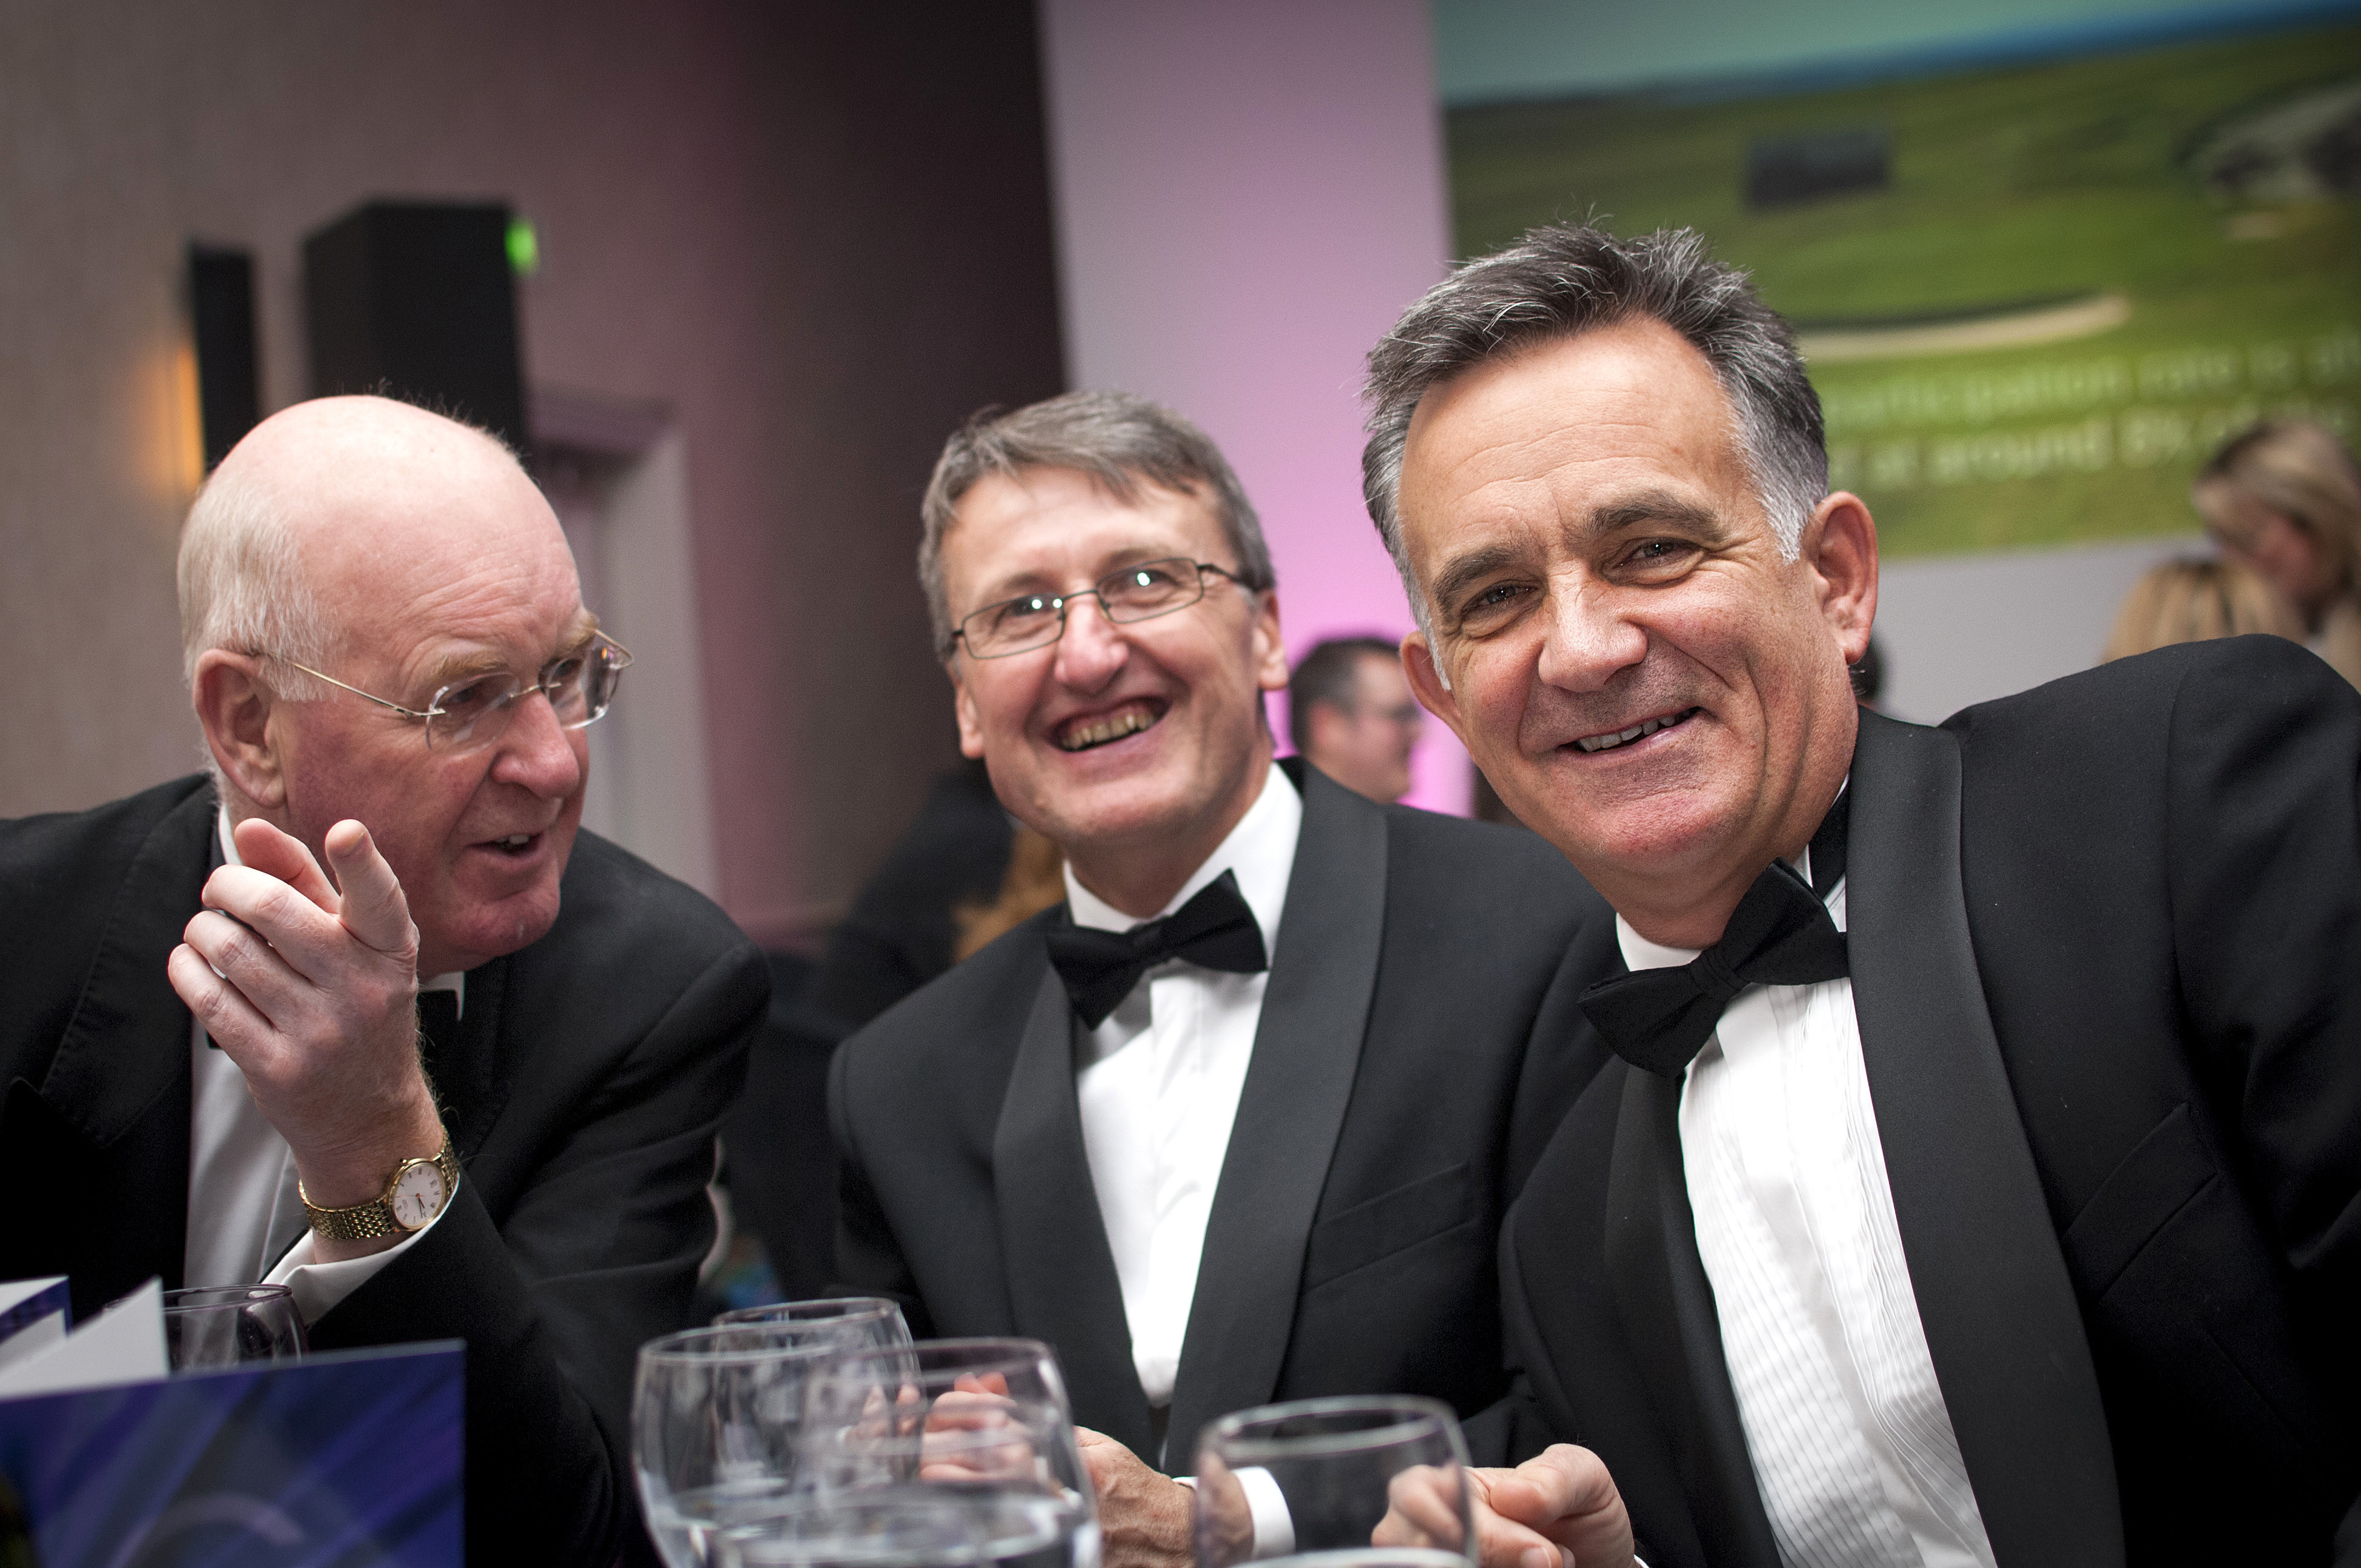 PerryGolf's Graham Reid and family friend John Steele join PerryGolf Co-Founder, Colin Dalgleish, in celebrating his receipt of a Special Recognition award at the 2015 Scottish Golf Tourism Awards